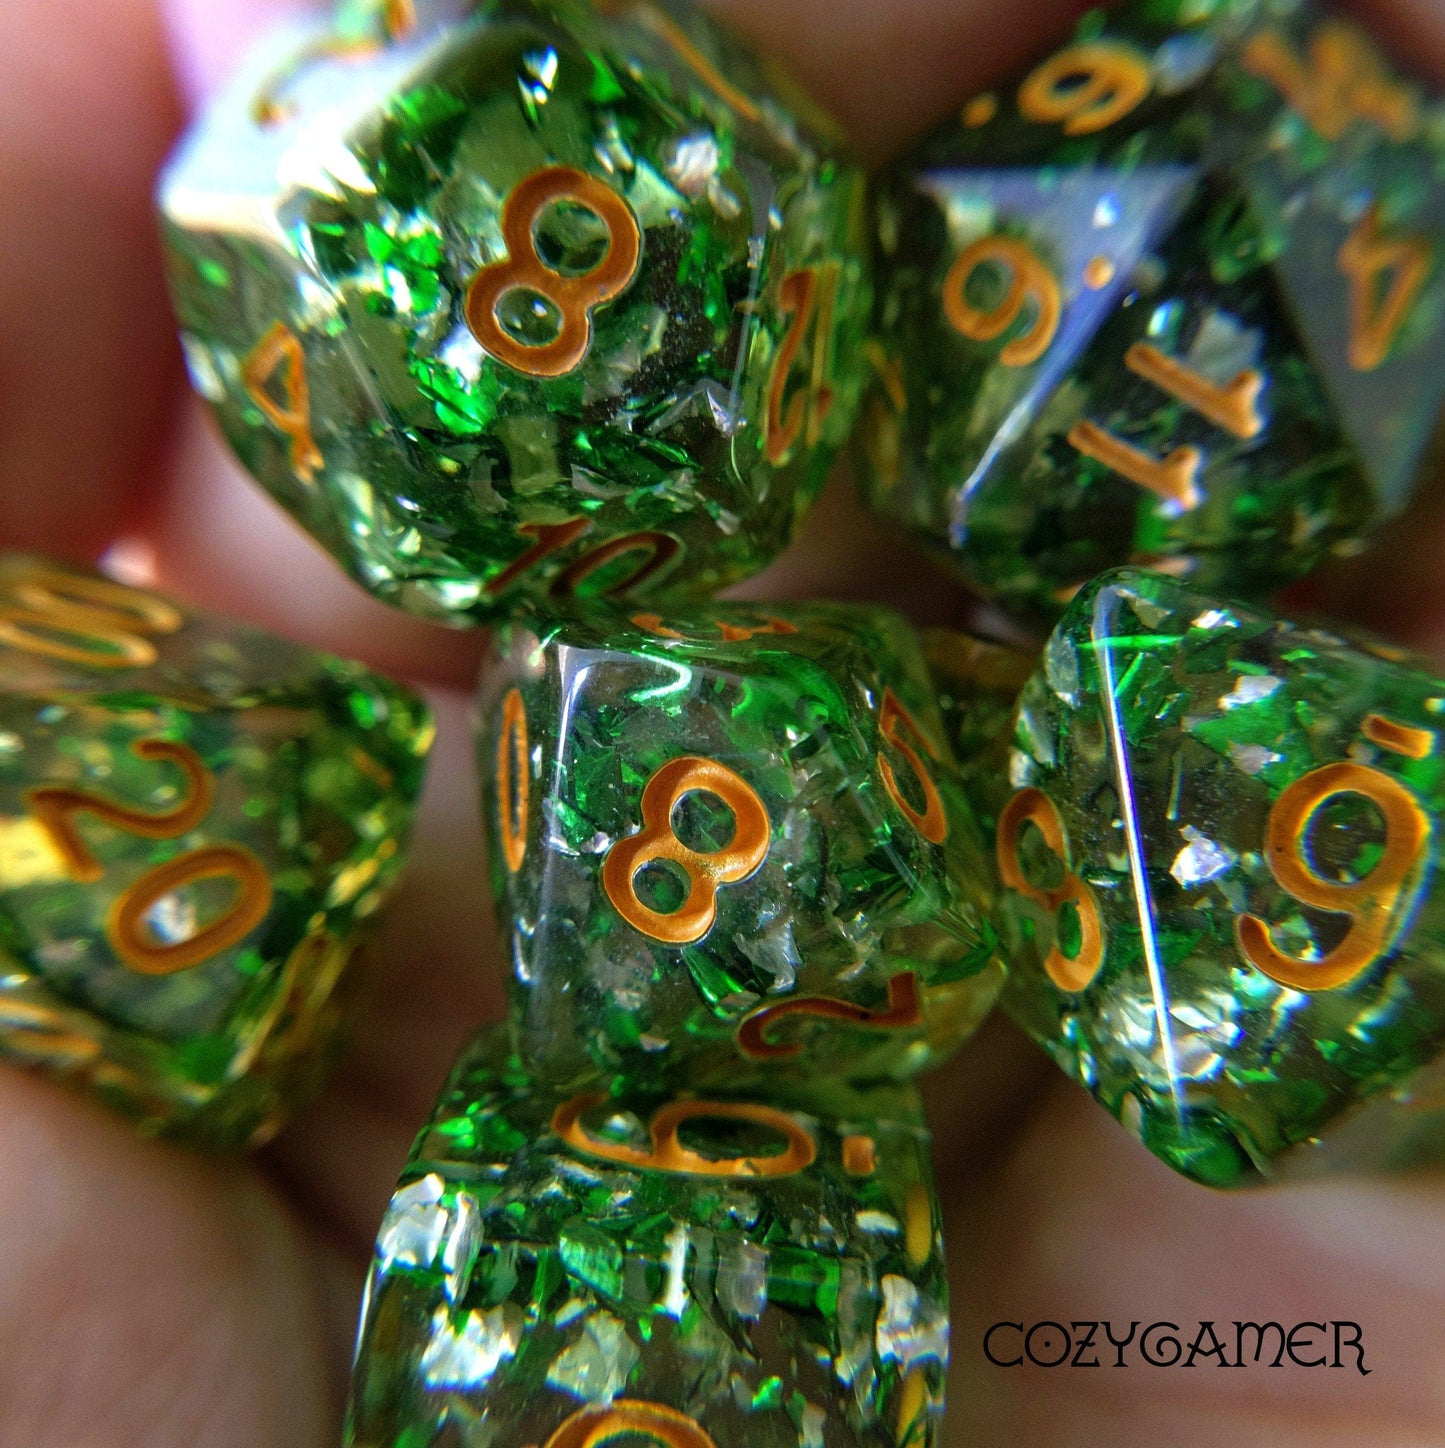 Clear Green Scepter Dice Set. Translucent with Green and Silver Flakes